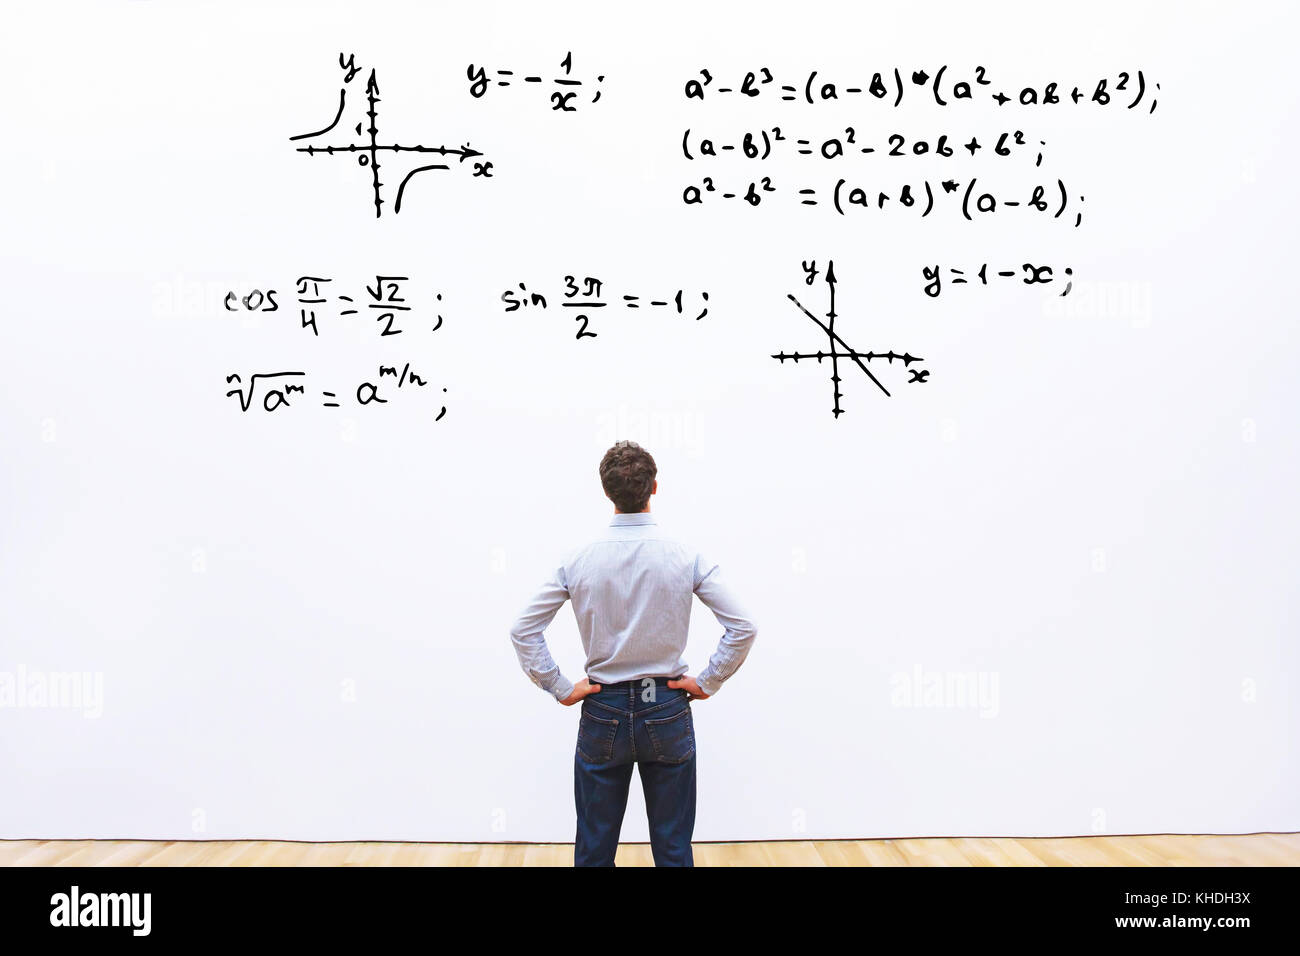 student looking at mathematical formulas, learn maths education concept Stock Photo